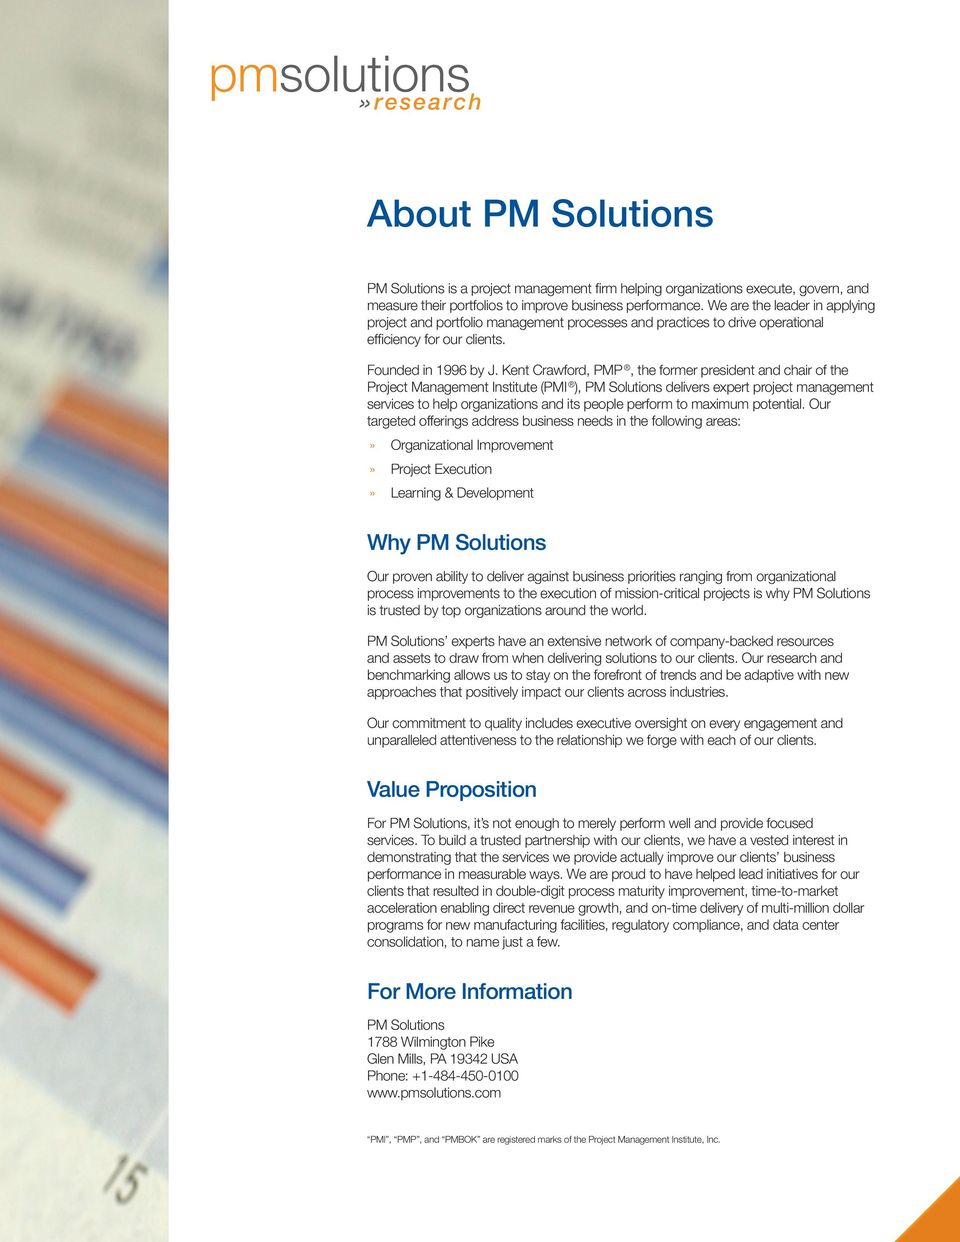 Kent Crawford, PMP, the former president and chair of the Project Management Institute (PMI ), PM Solutions delivers expert project management services to help organizations and its people perform to